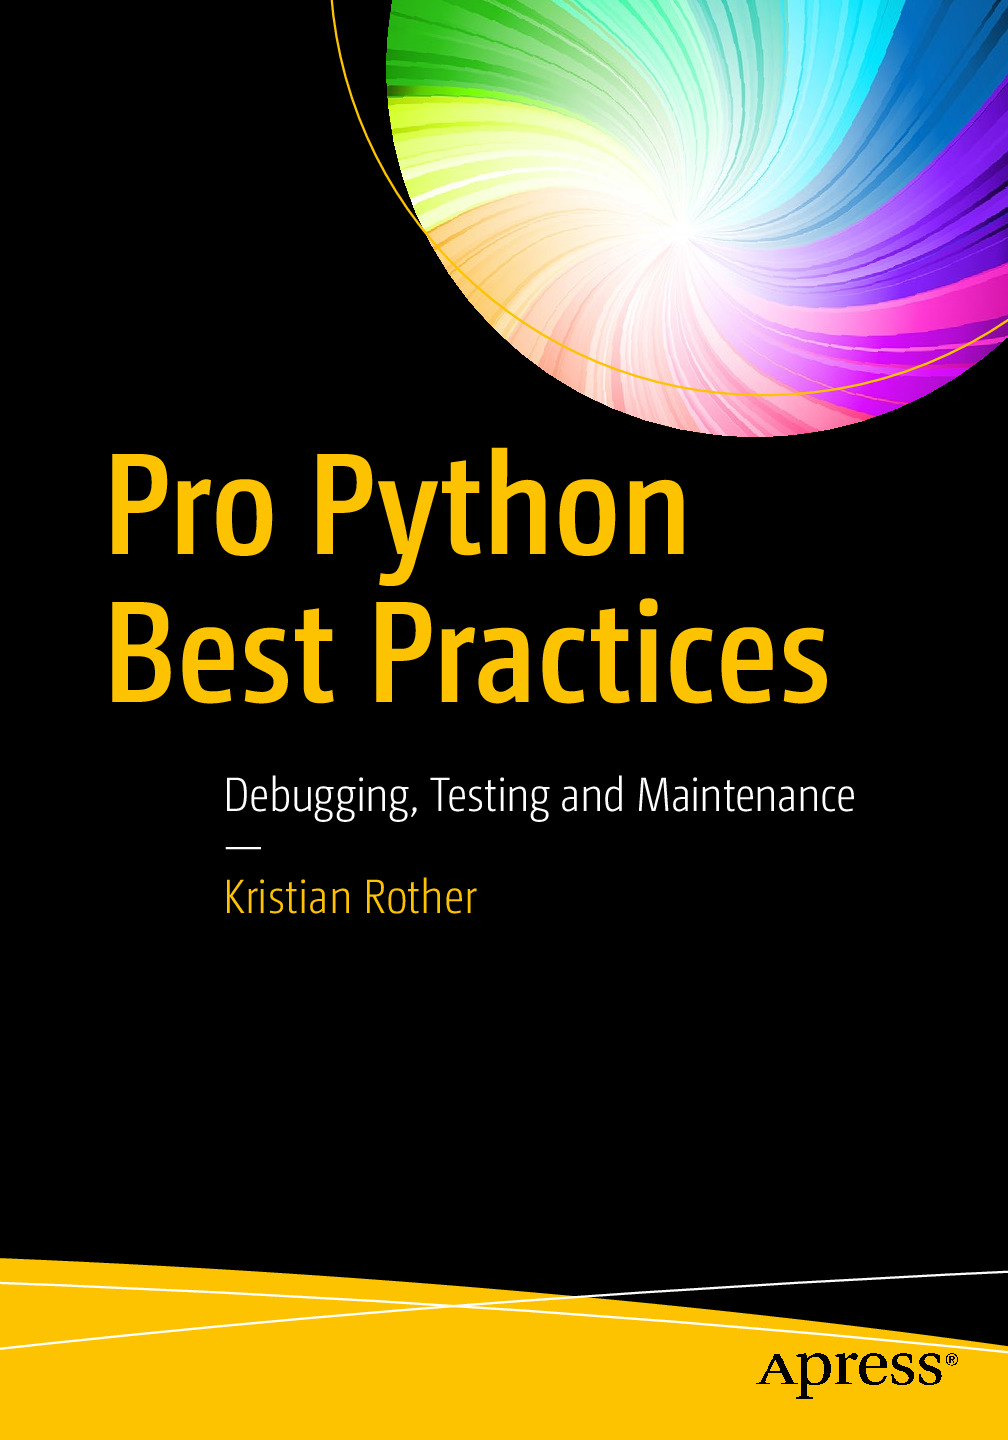 Pro Python Best Practices – Debugging, Testing and Maintenance